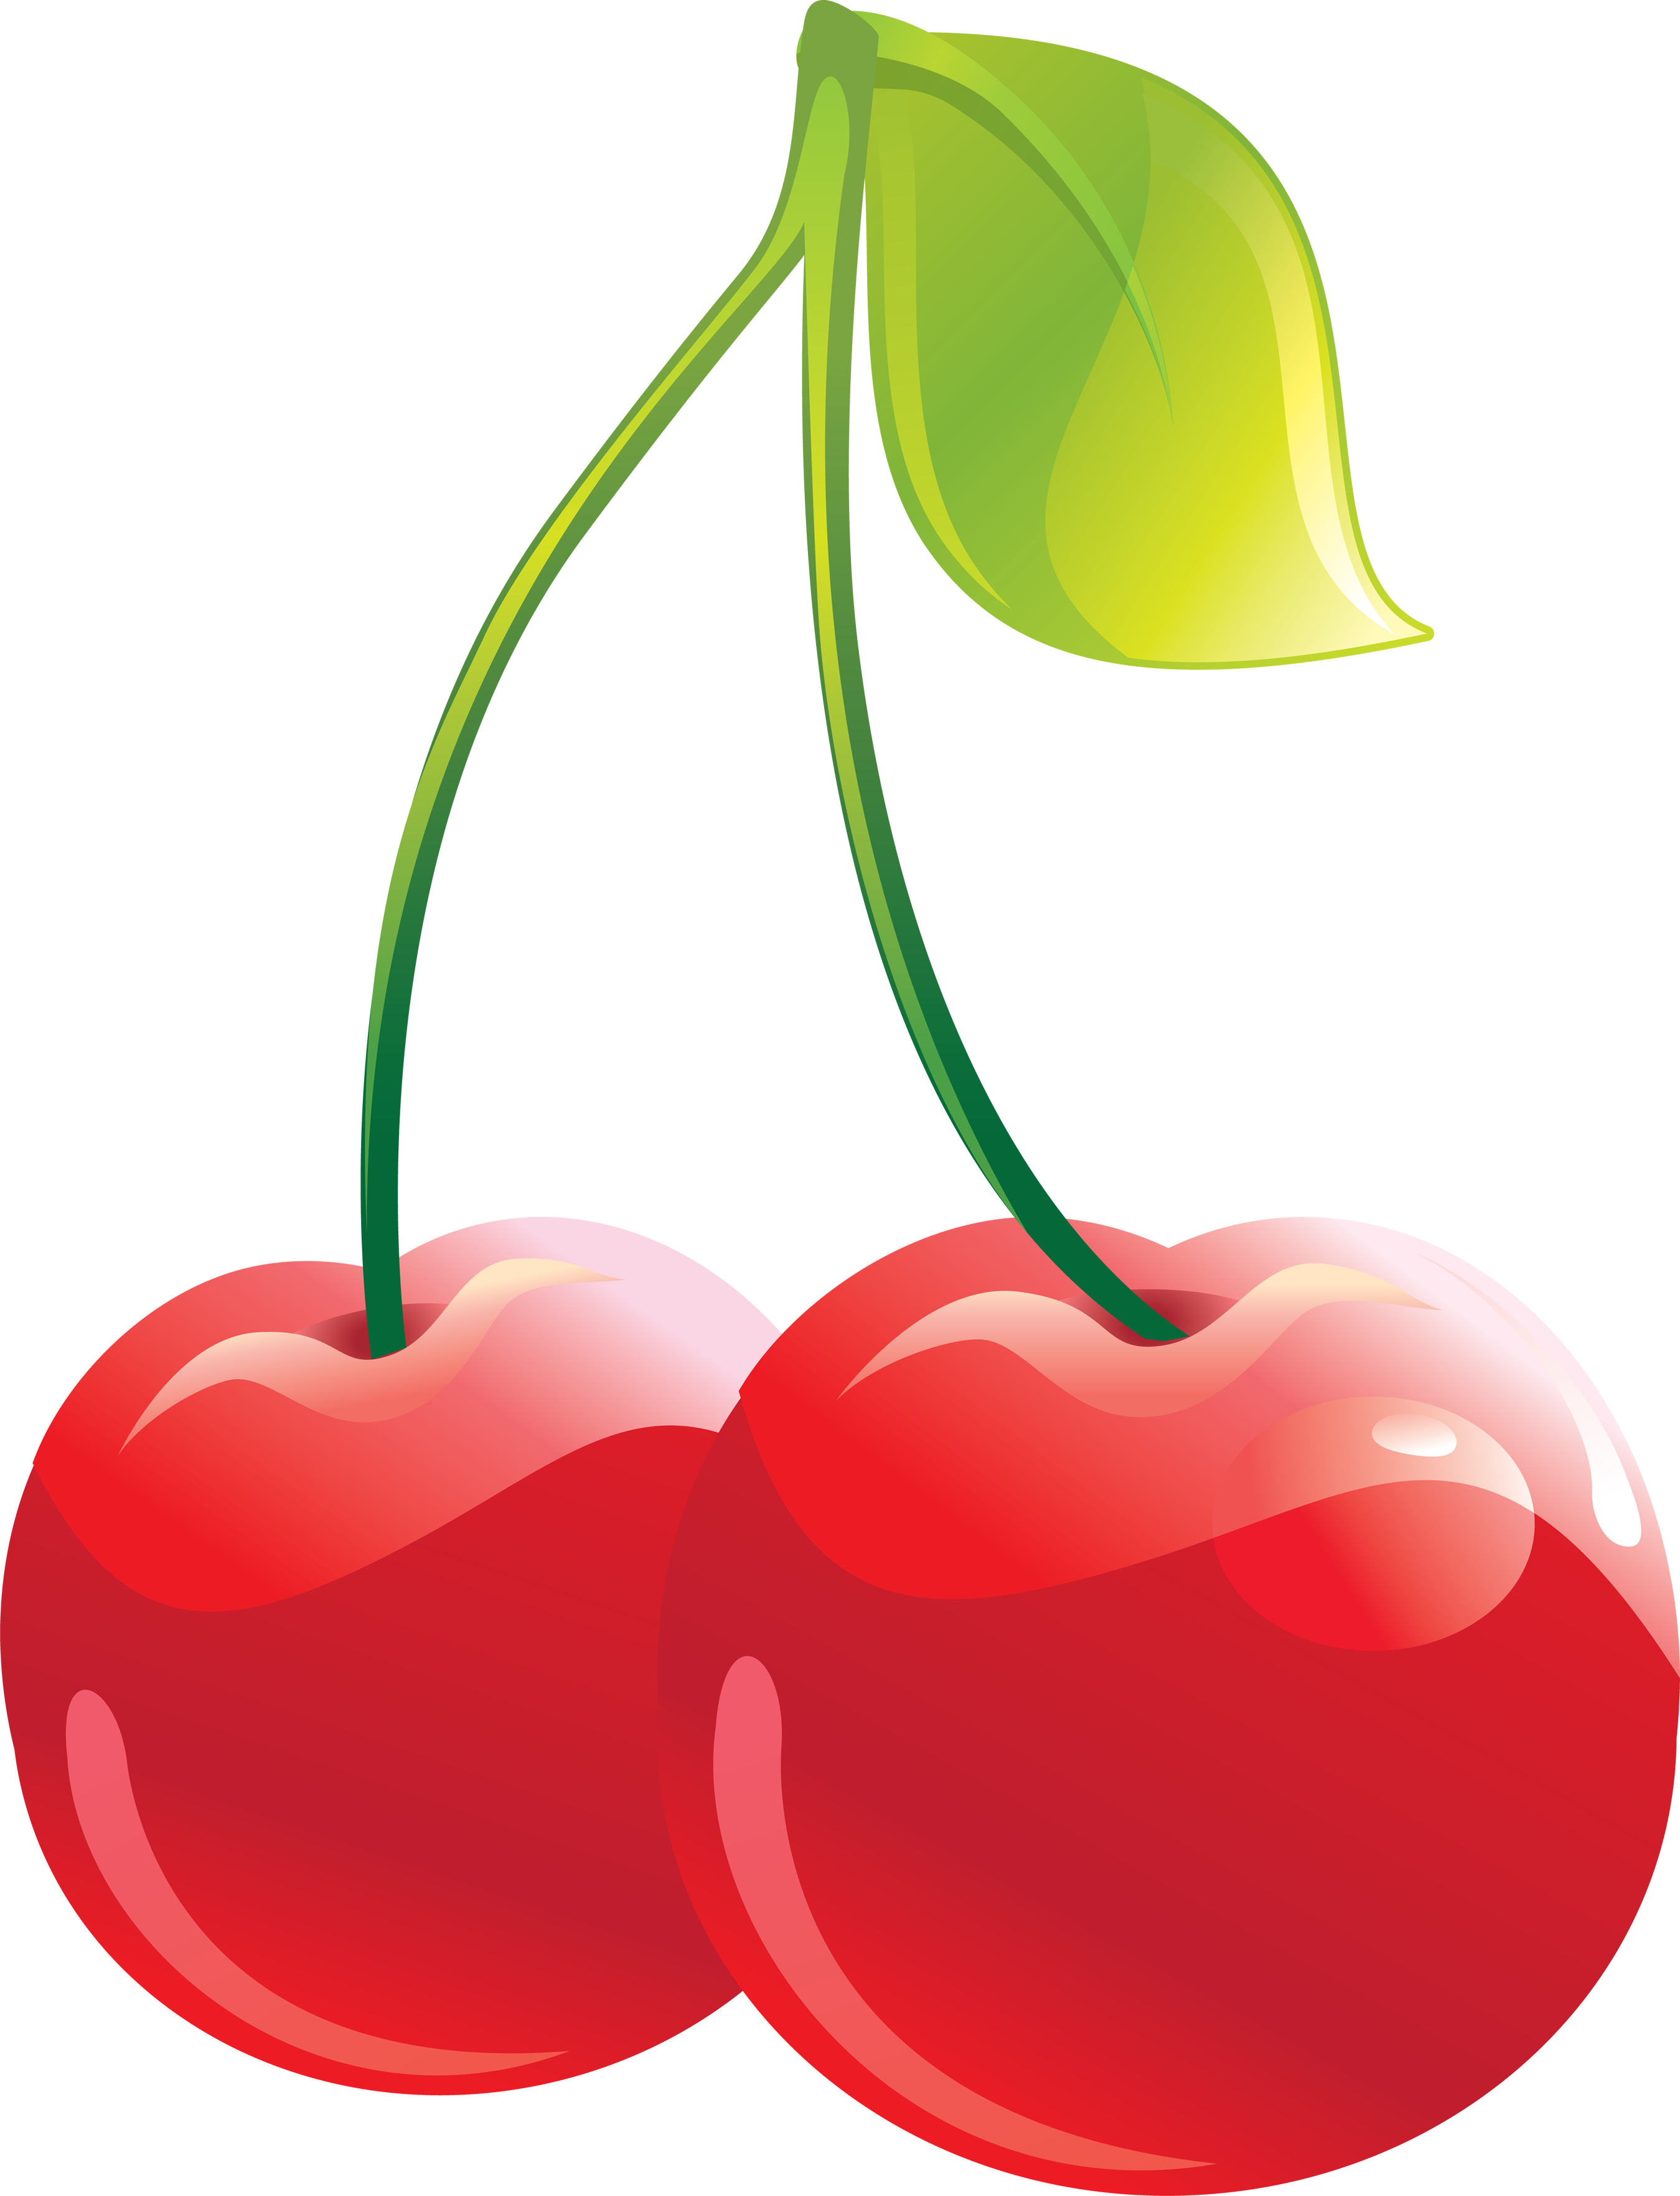 One Cherry Clip Art Download Clipart Cherry In One